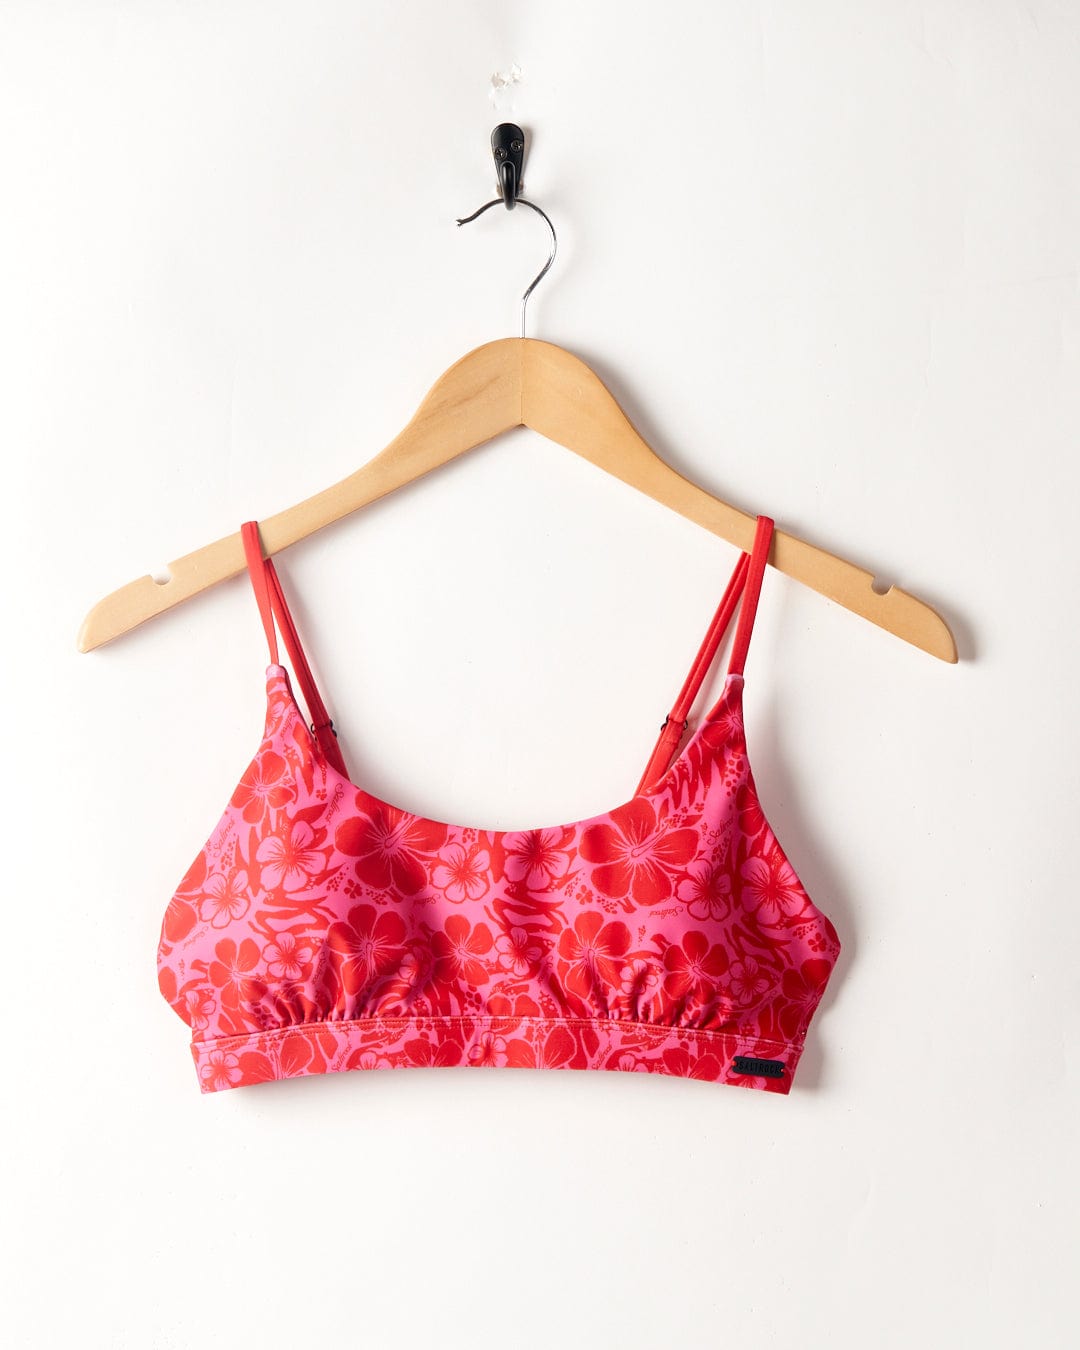 Cleo Hibiscus Saltrock - Recycled Bikini Top - Pink hanging on a wooden hanger against a white wall.